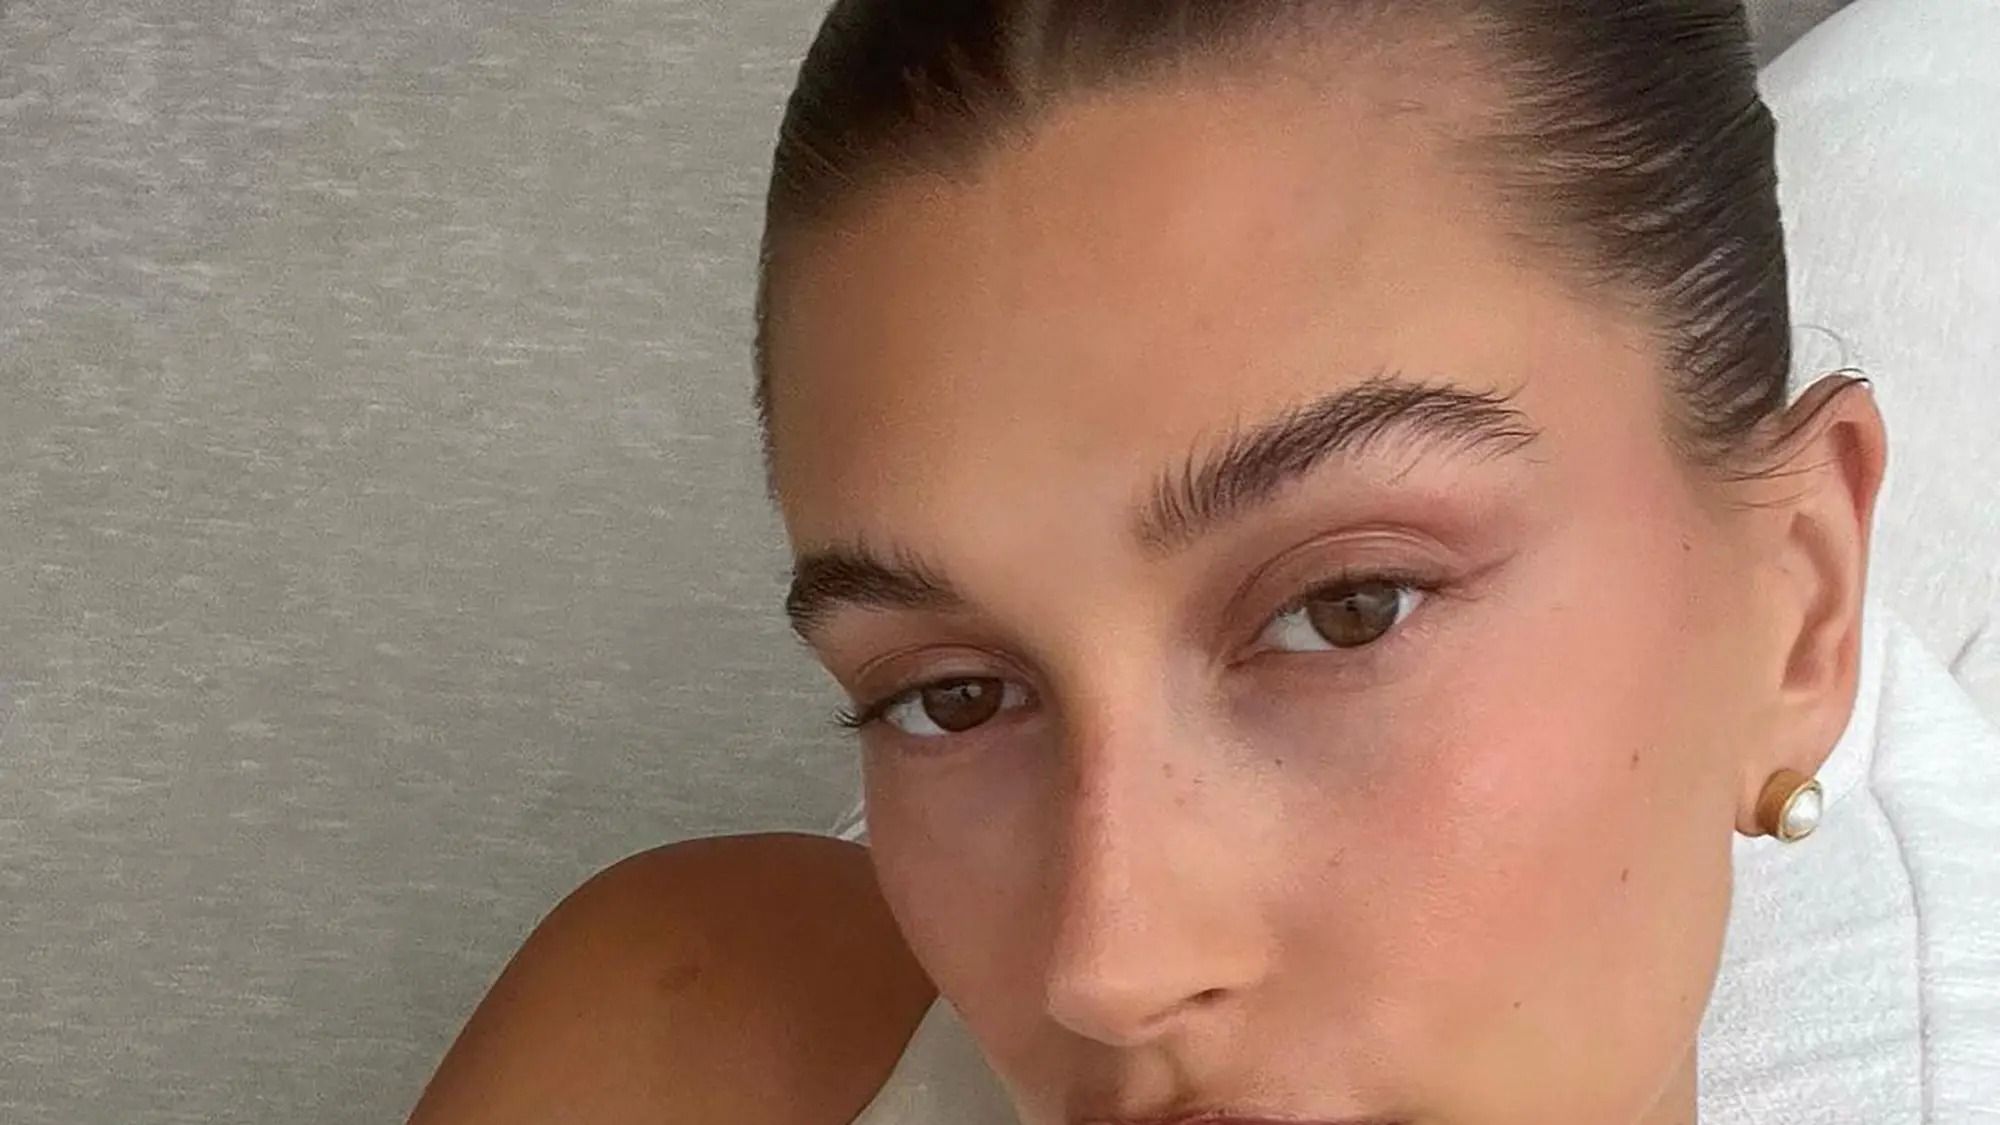 Hailey Bieber just gave a tutorial on her contouring trick